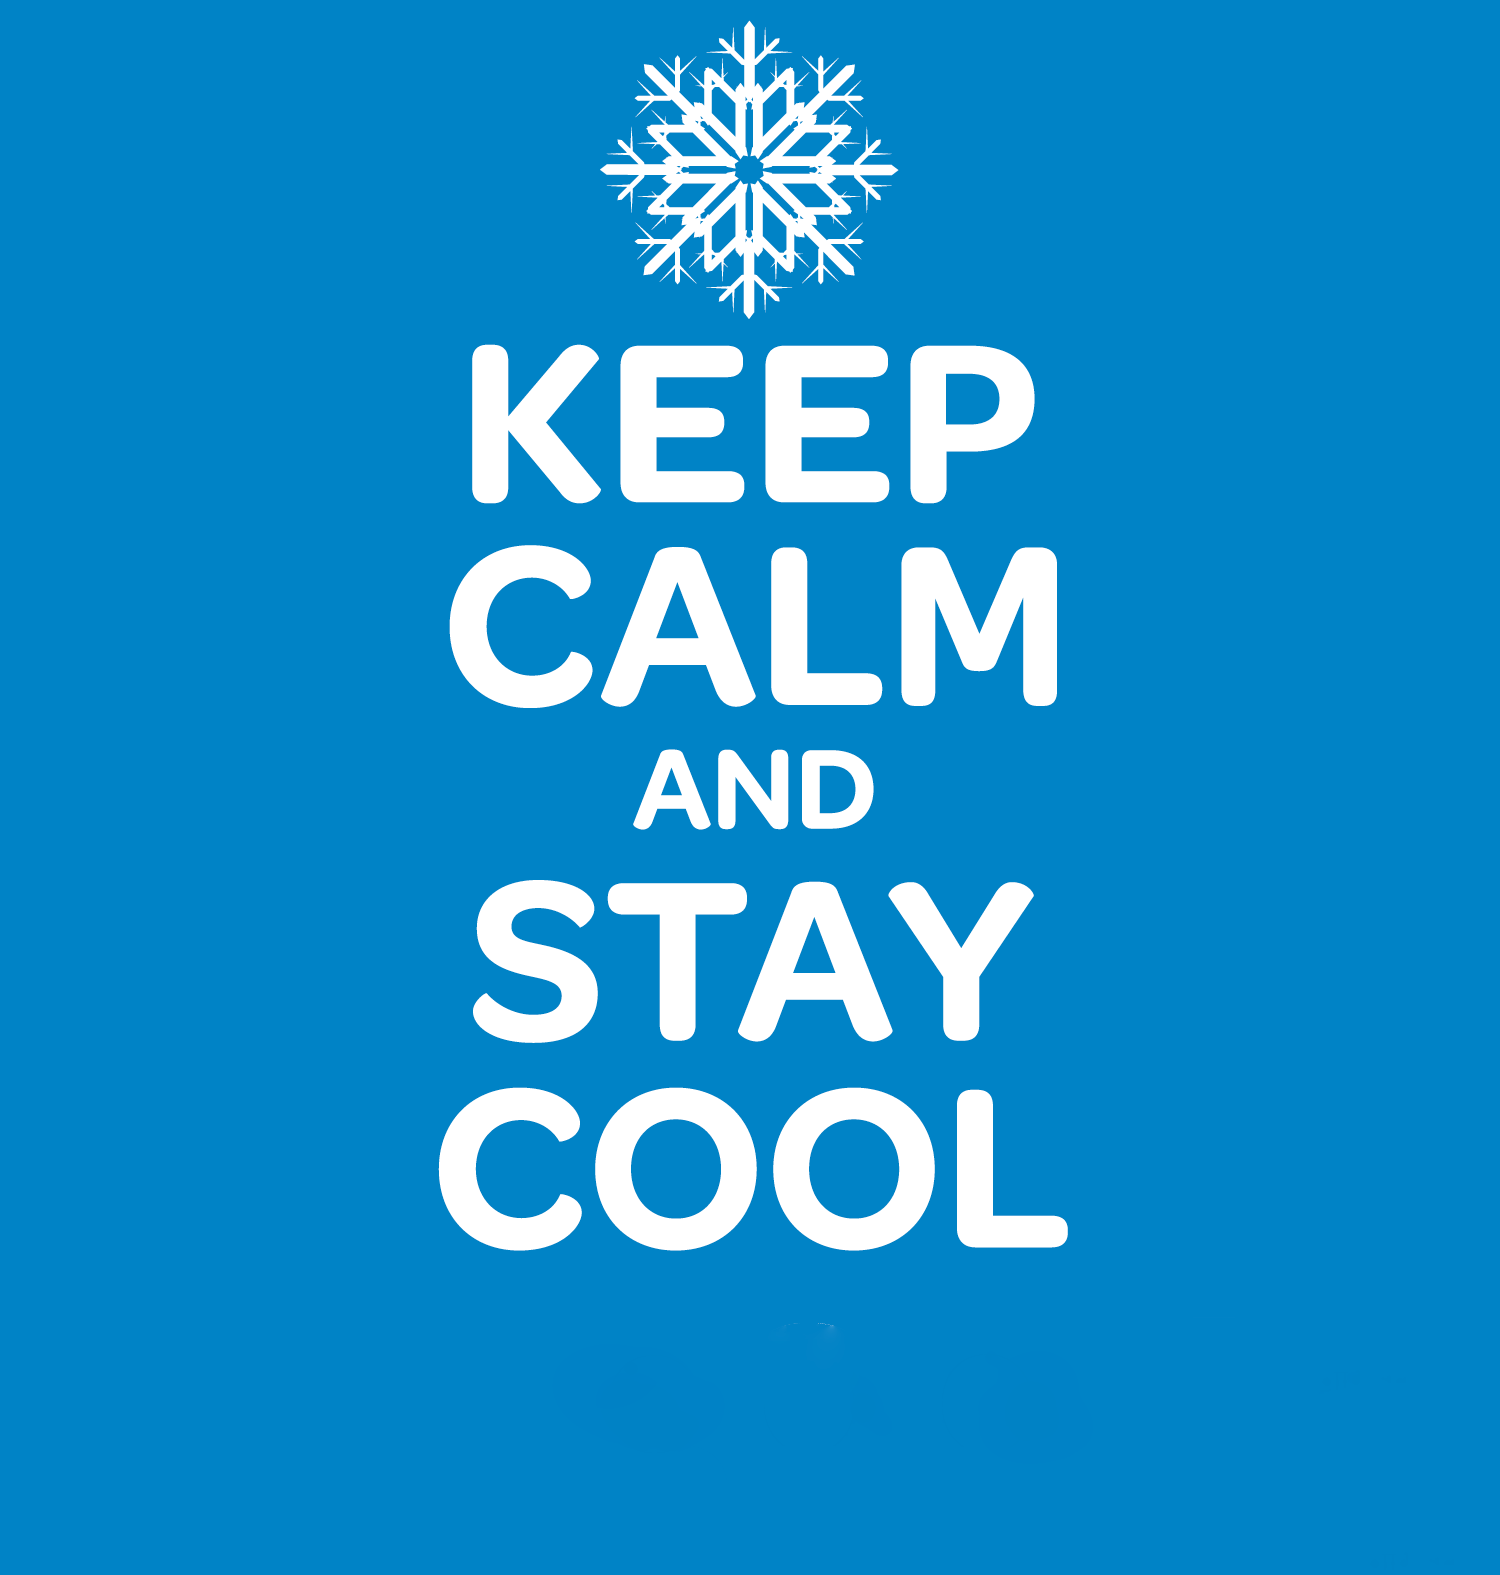 https://www.cianciconstruction.com/wp-content/uploads/2017/07/keep-calm-stay.png